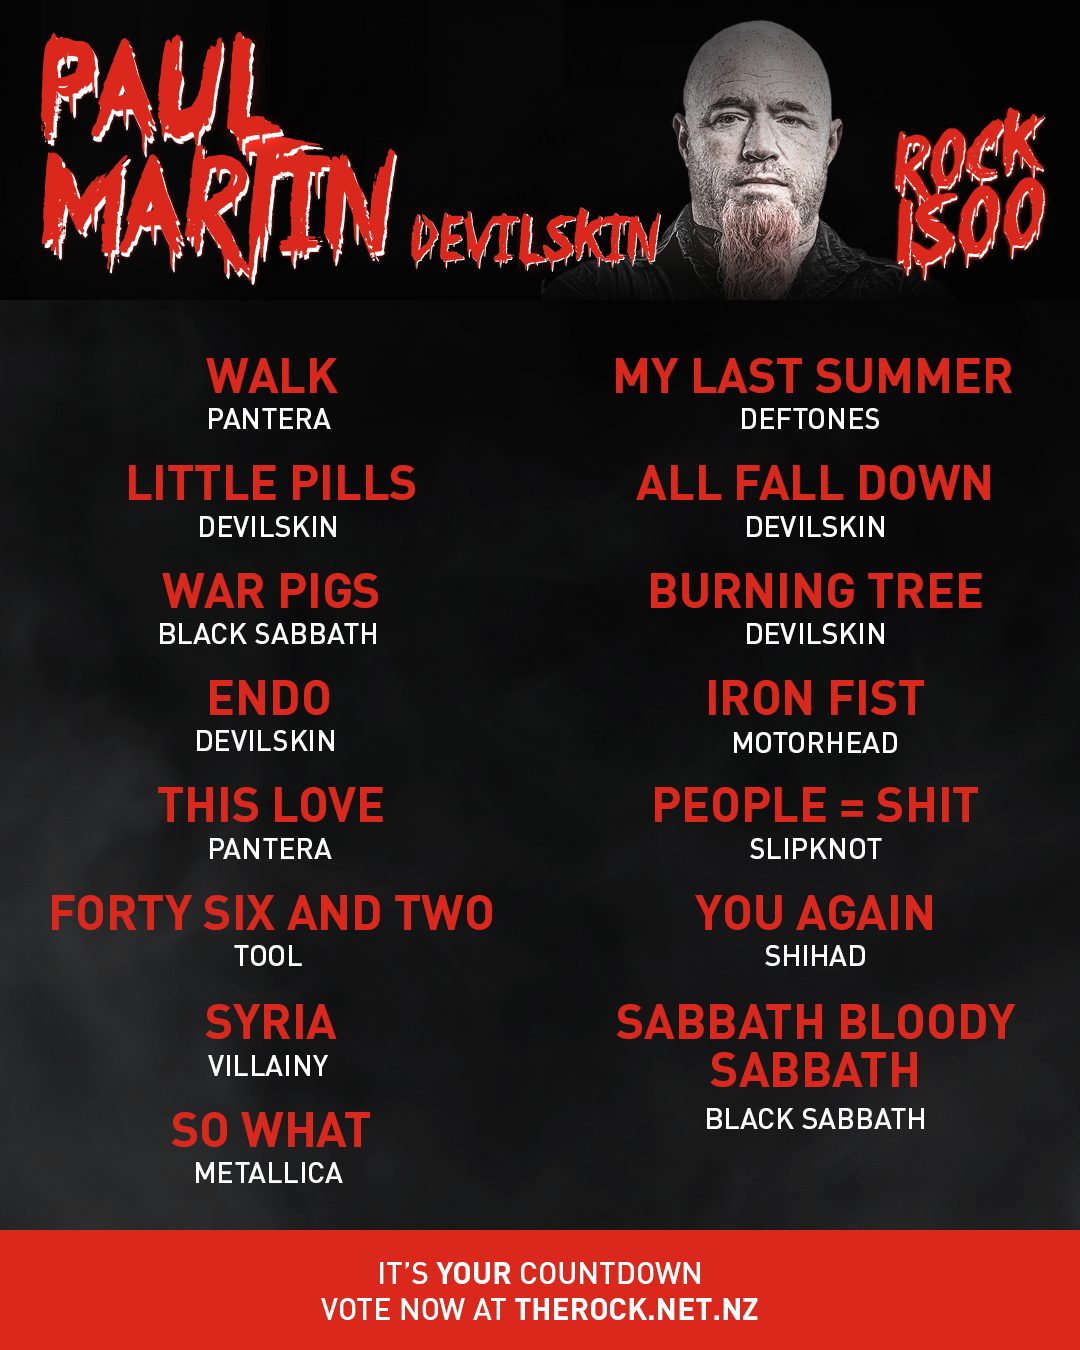 Our picks for this year's killer Rock 1500 countdown